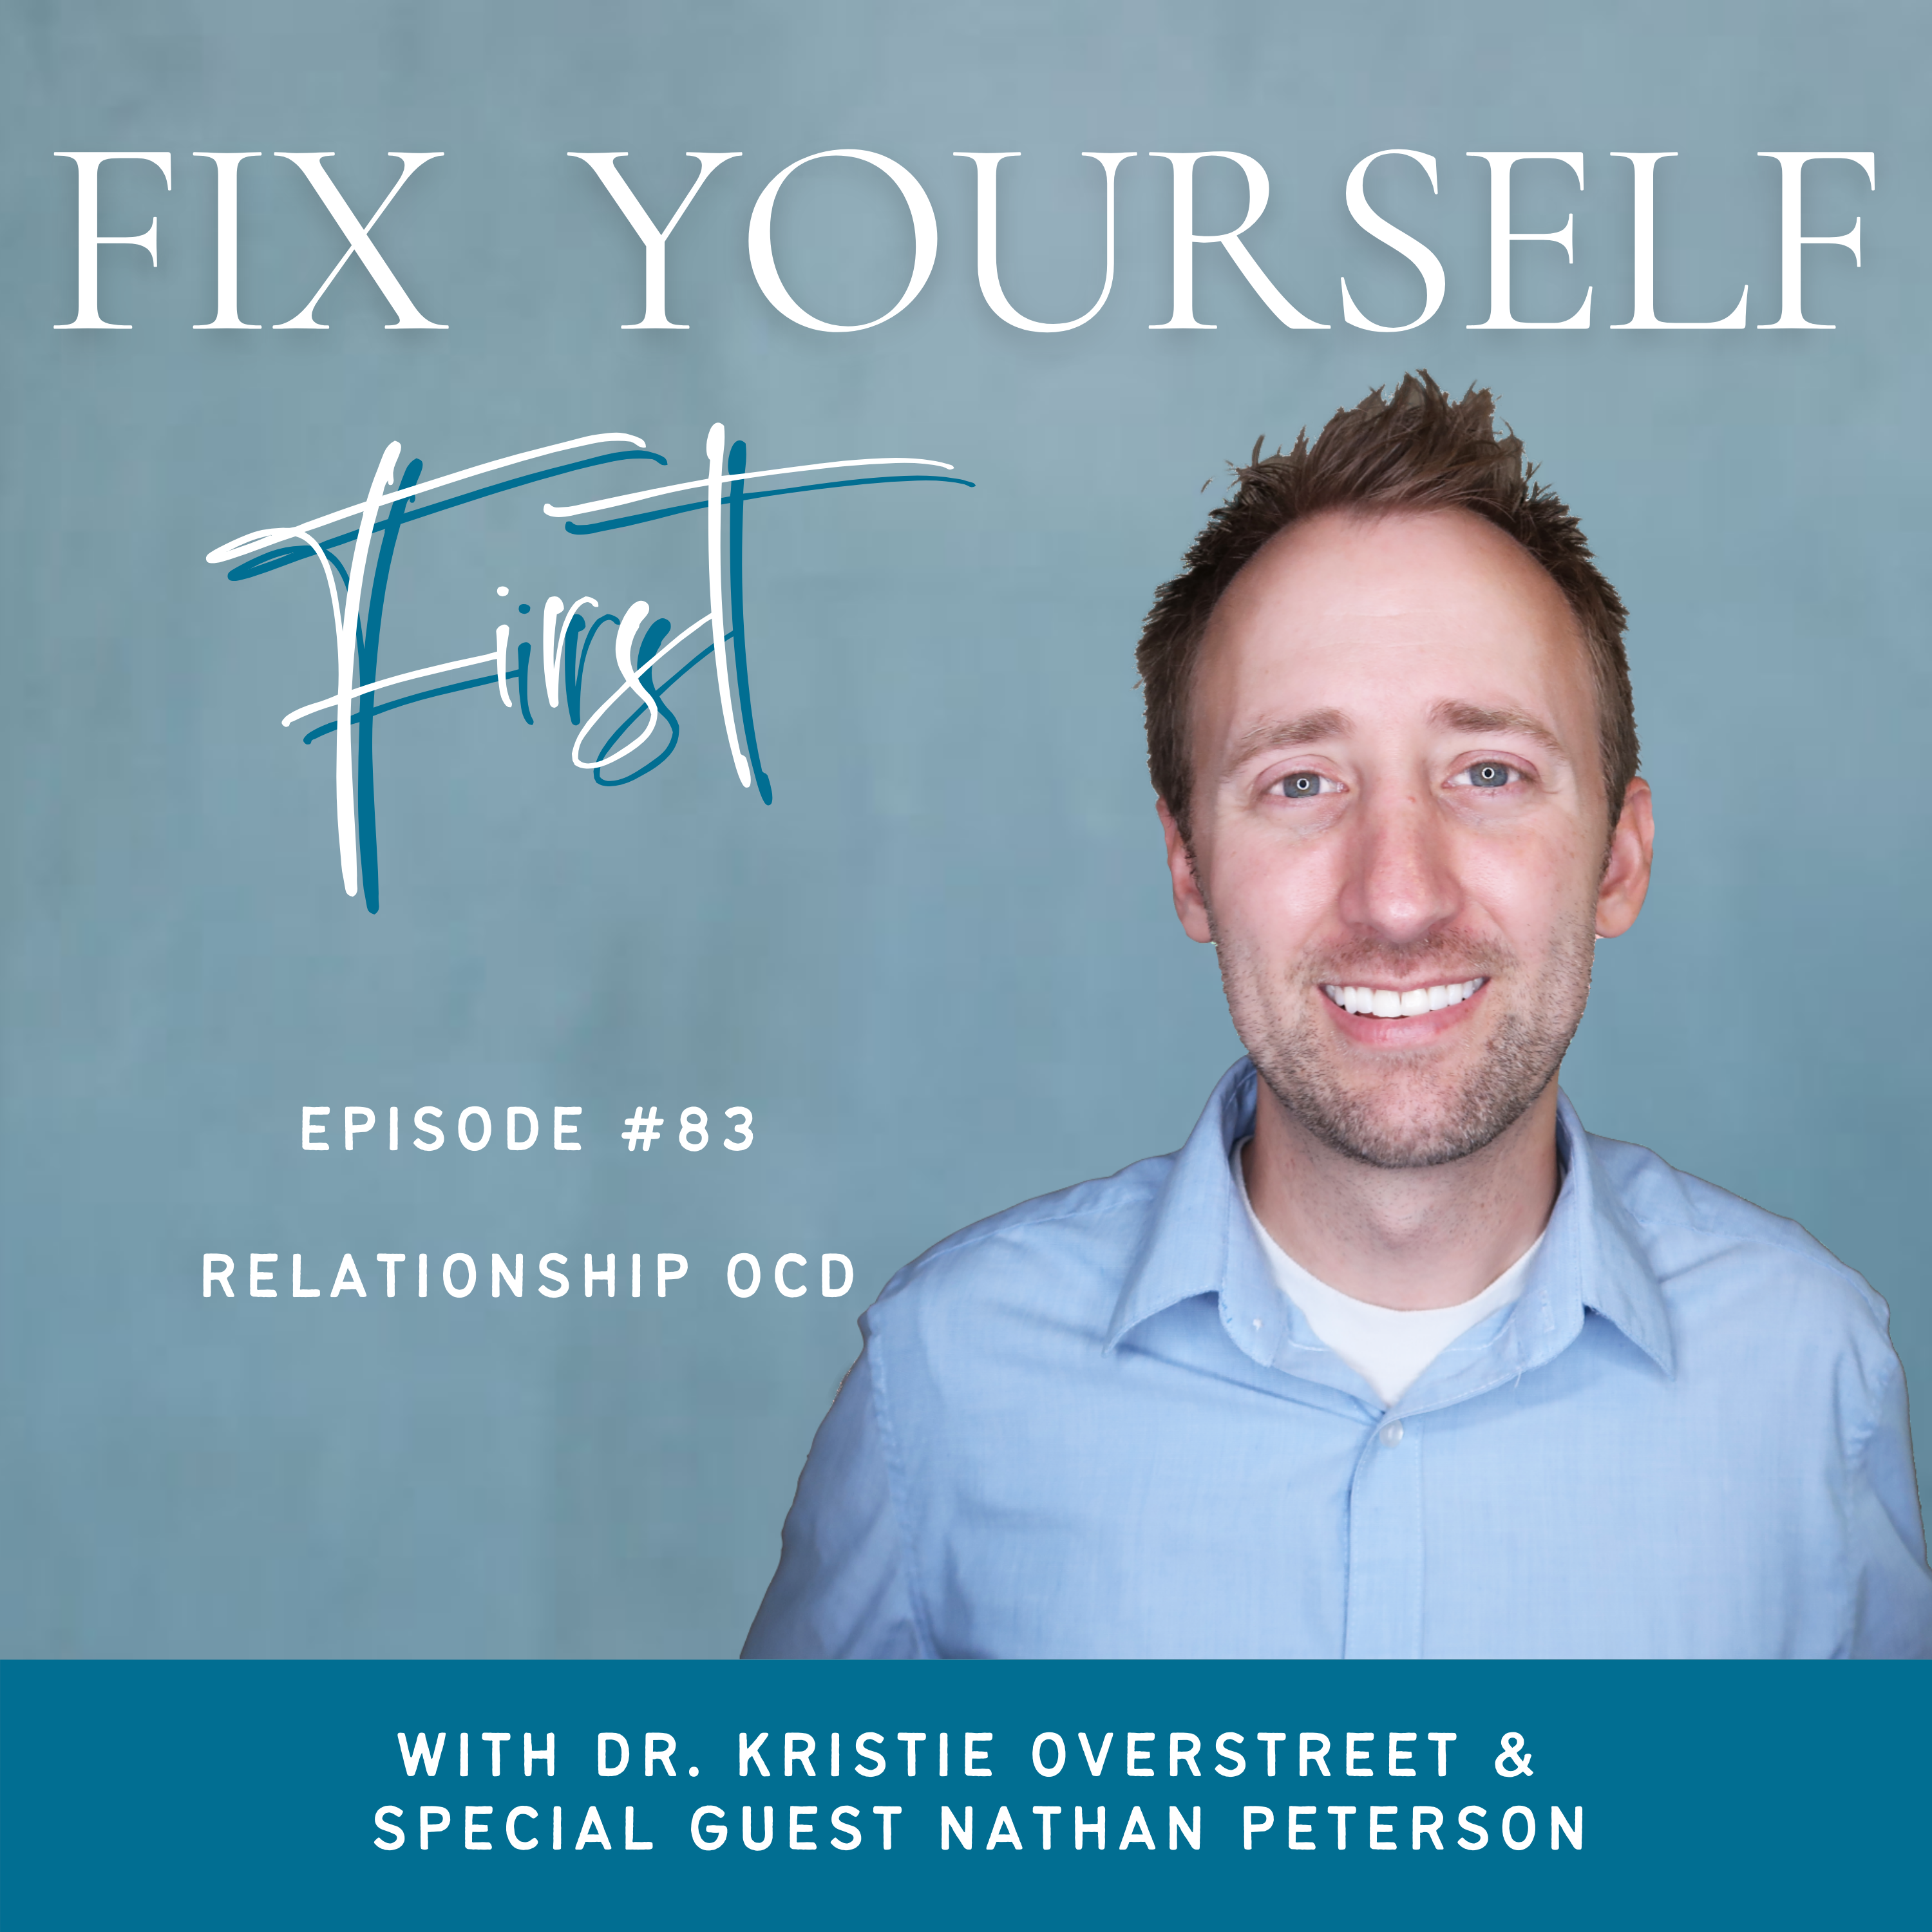 Fix Yourself First Episode 83 Relationship OCD with Nathan Peterson